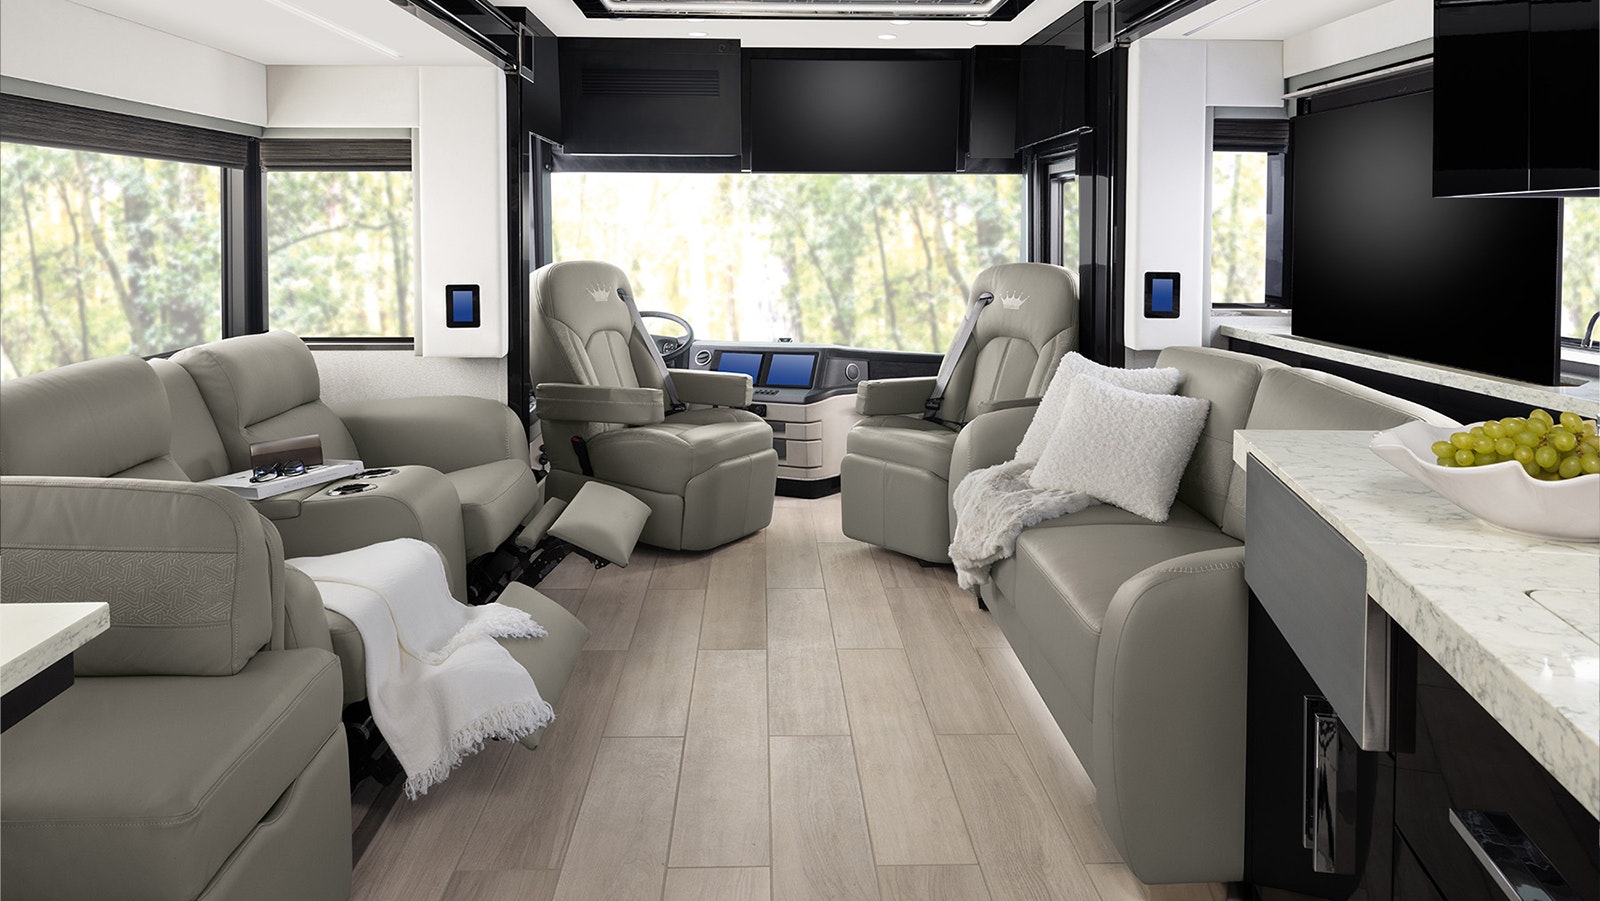 There's nothing about a high-end RV that doesn't scream "luxury."